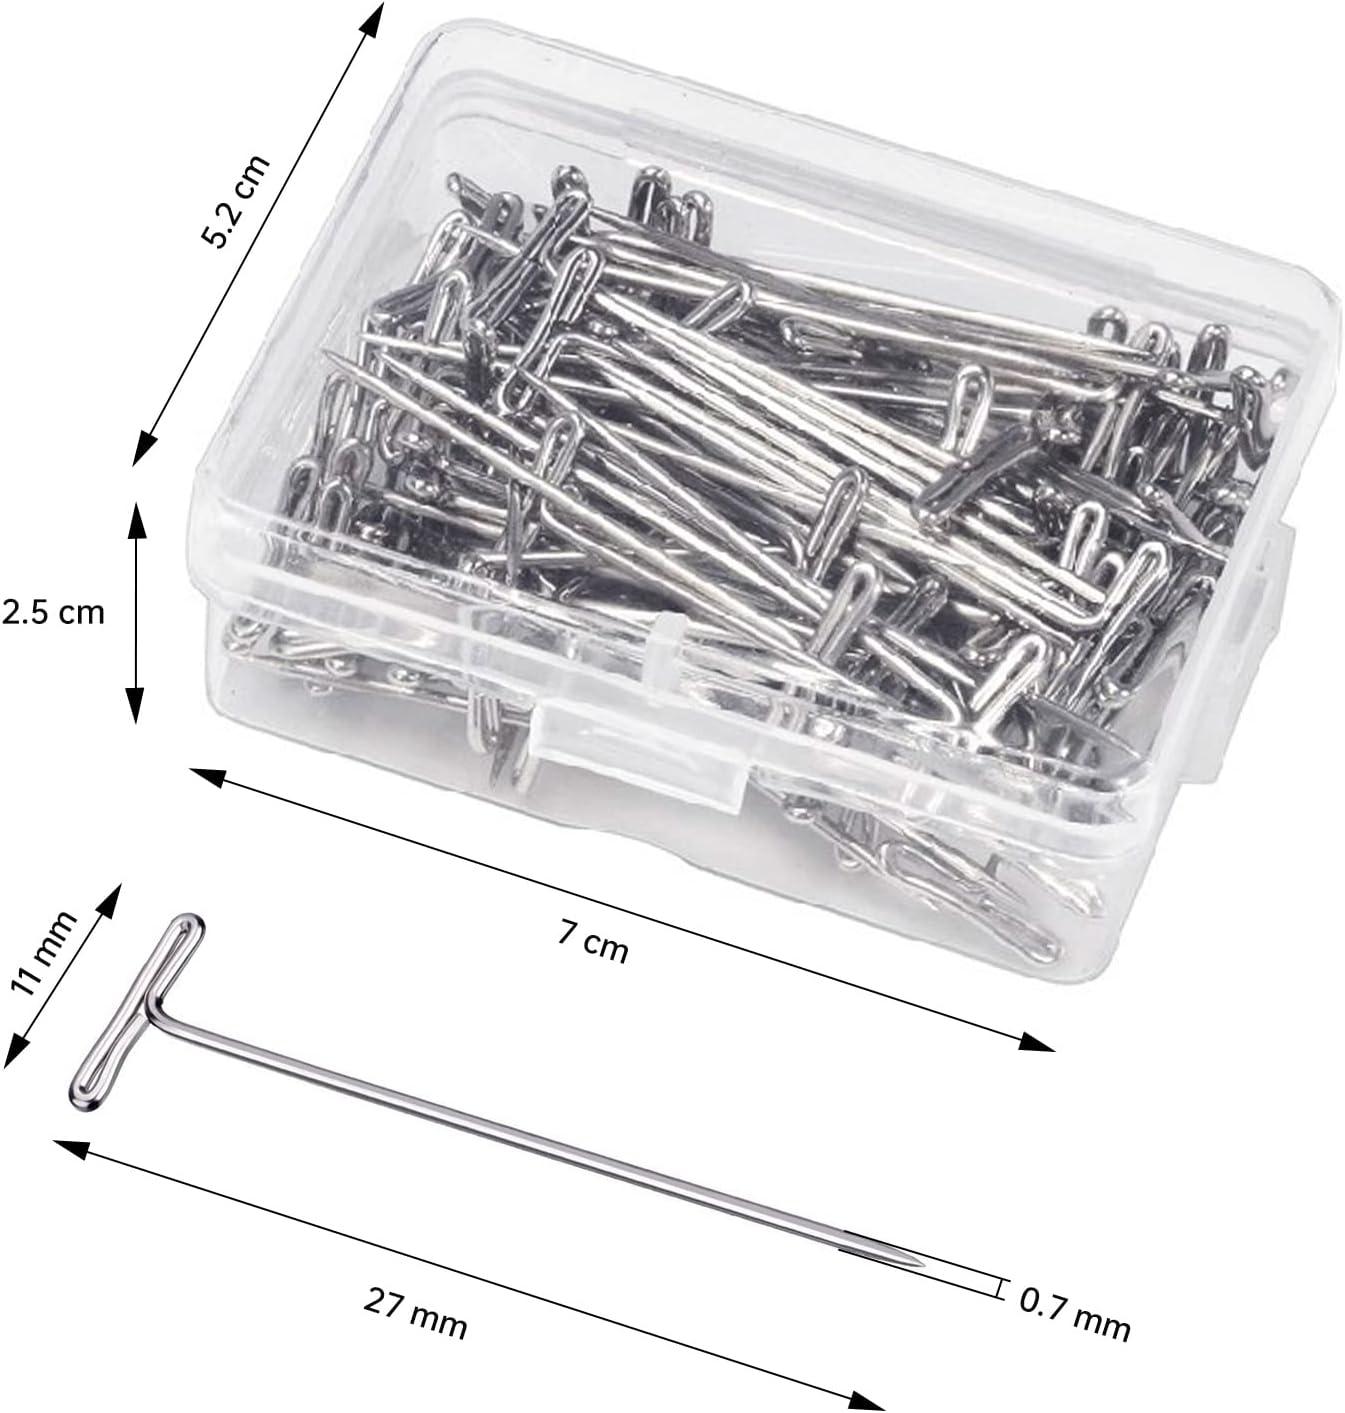 T-Pins, Metal Pins for Macrame & Sewing, 1 Inch Long (27mm) (1 Pack) 